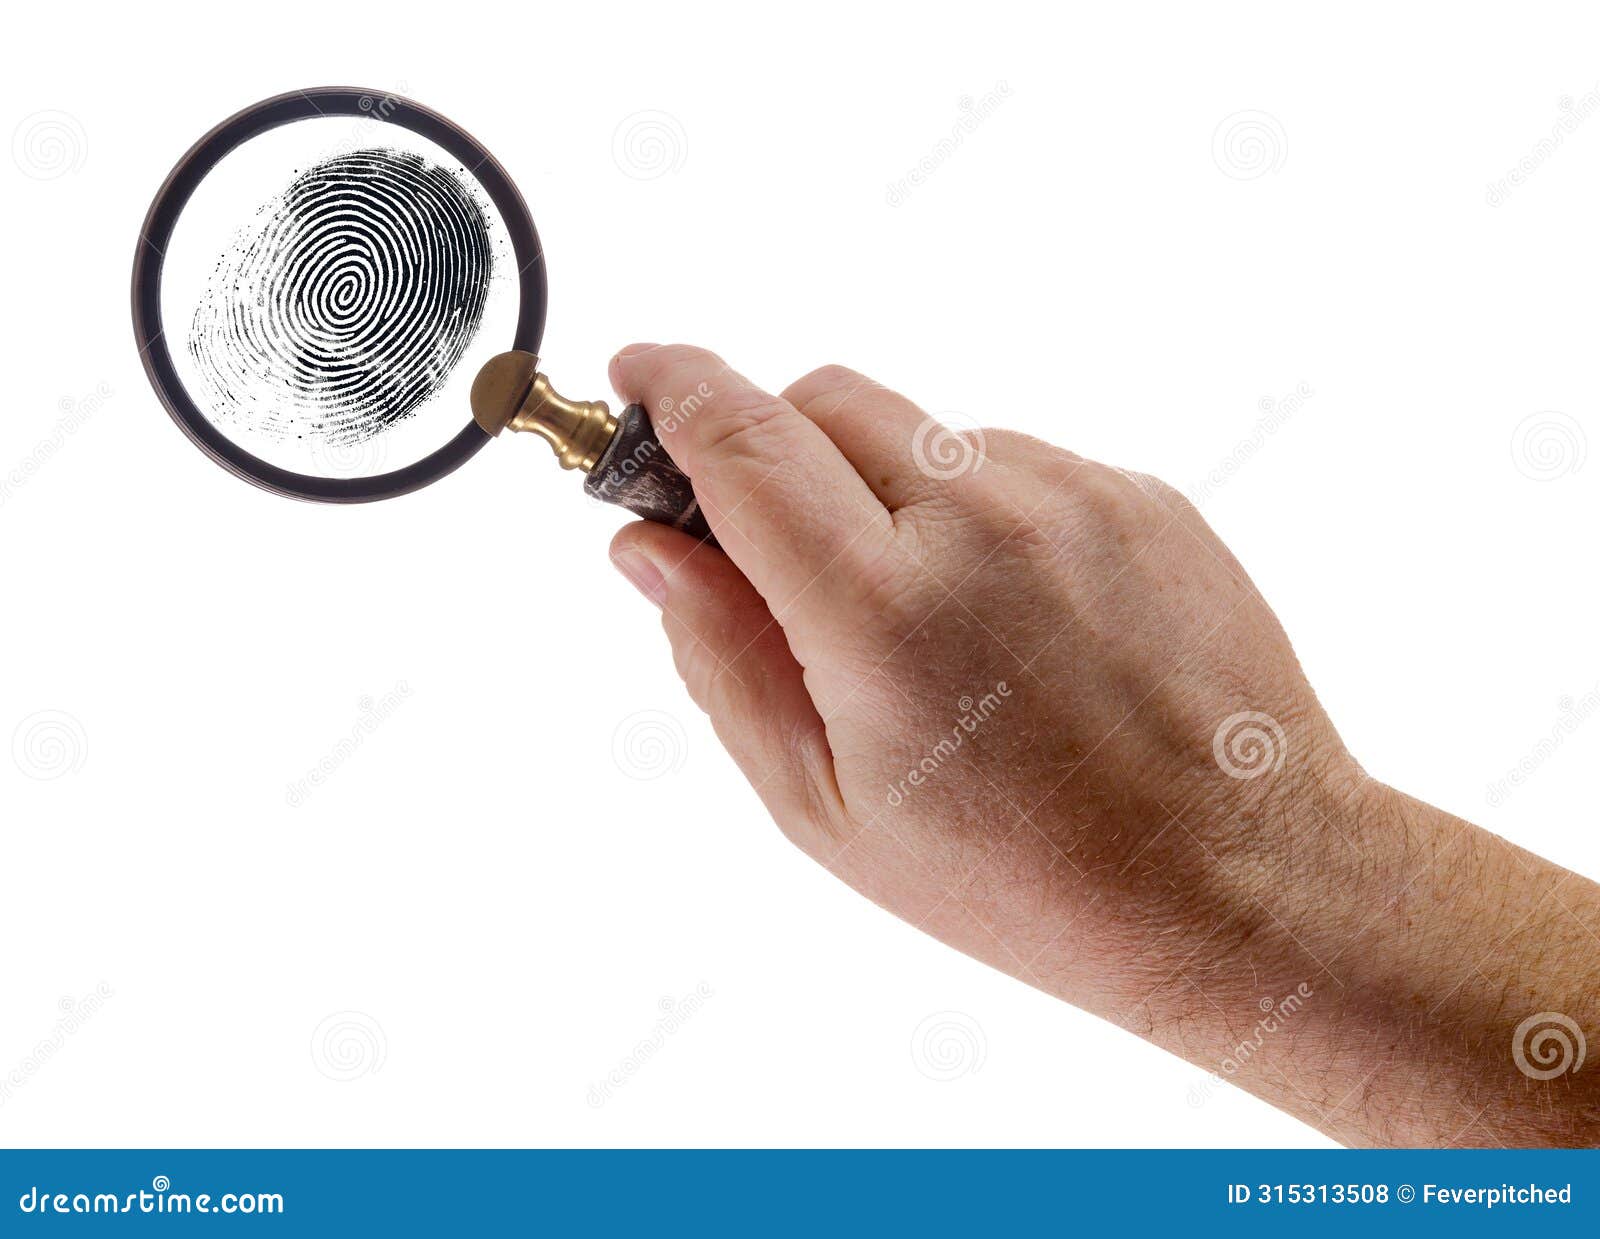 male hand holding magnifying glass viewing a fingerprint on a white background